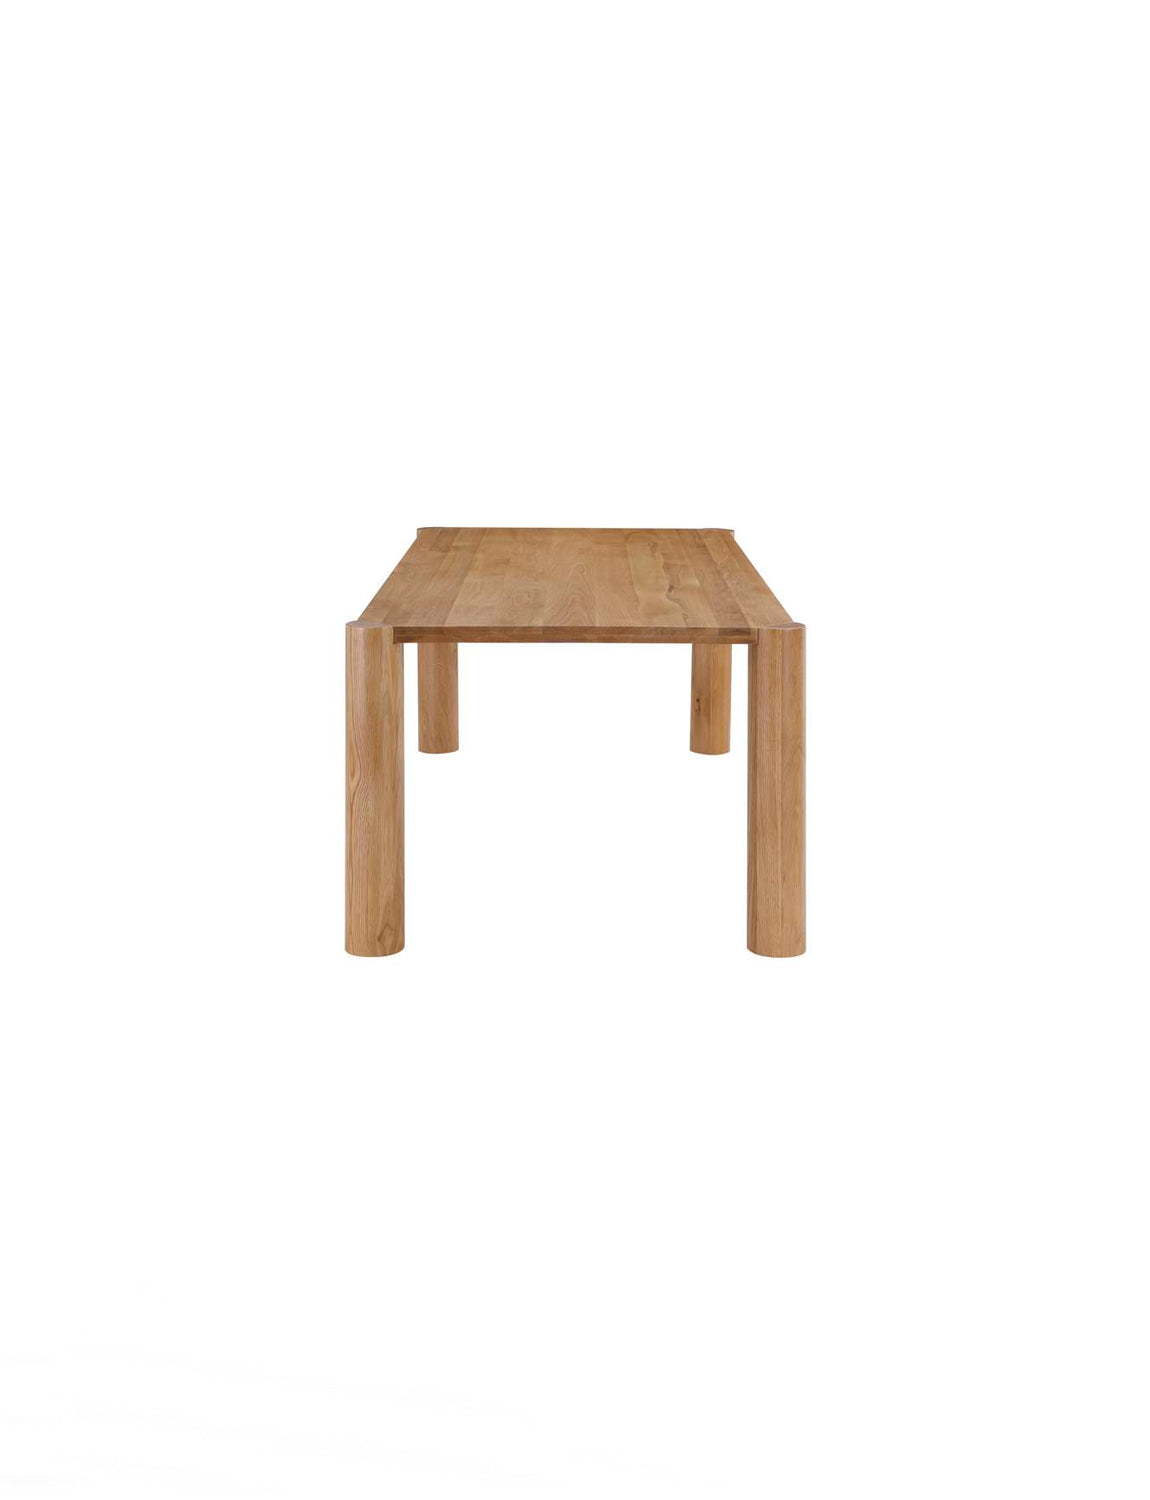 Lemy Small Dining Table